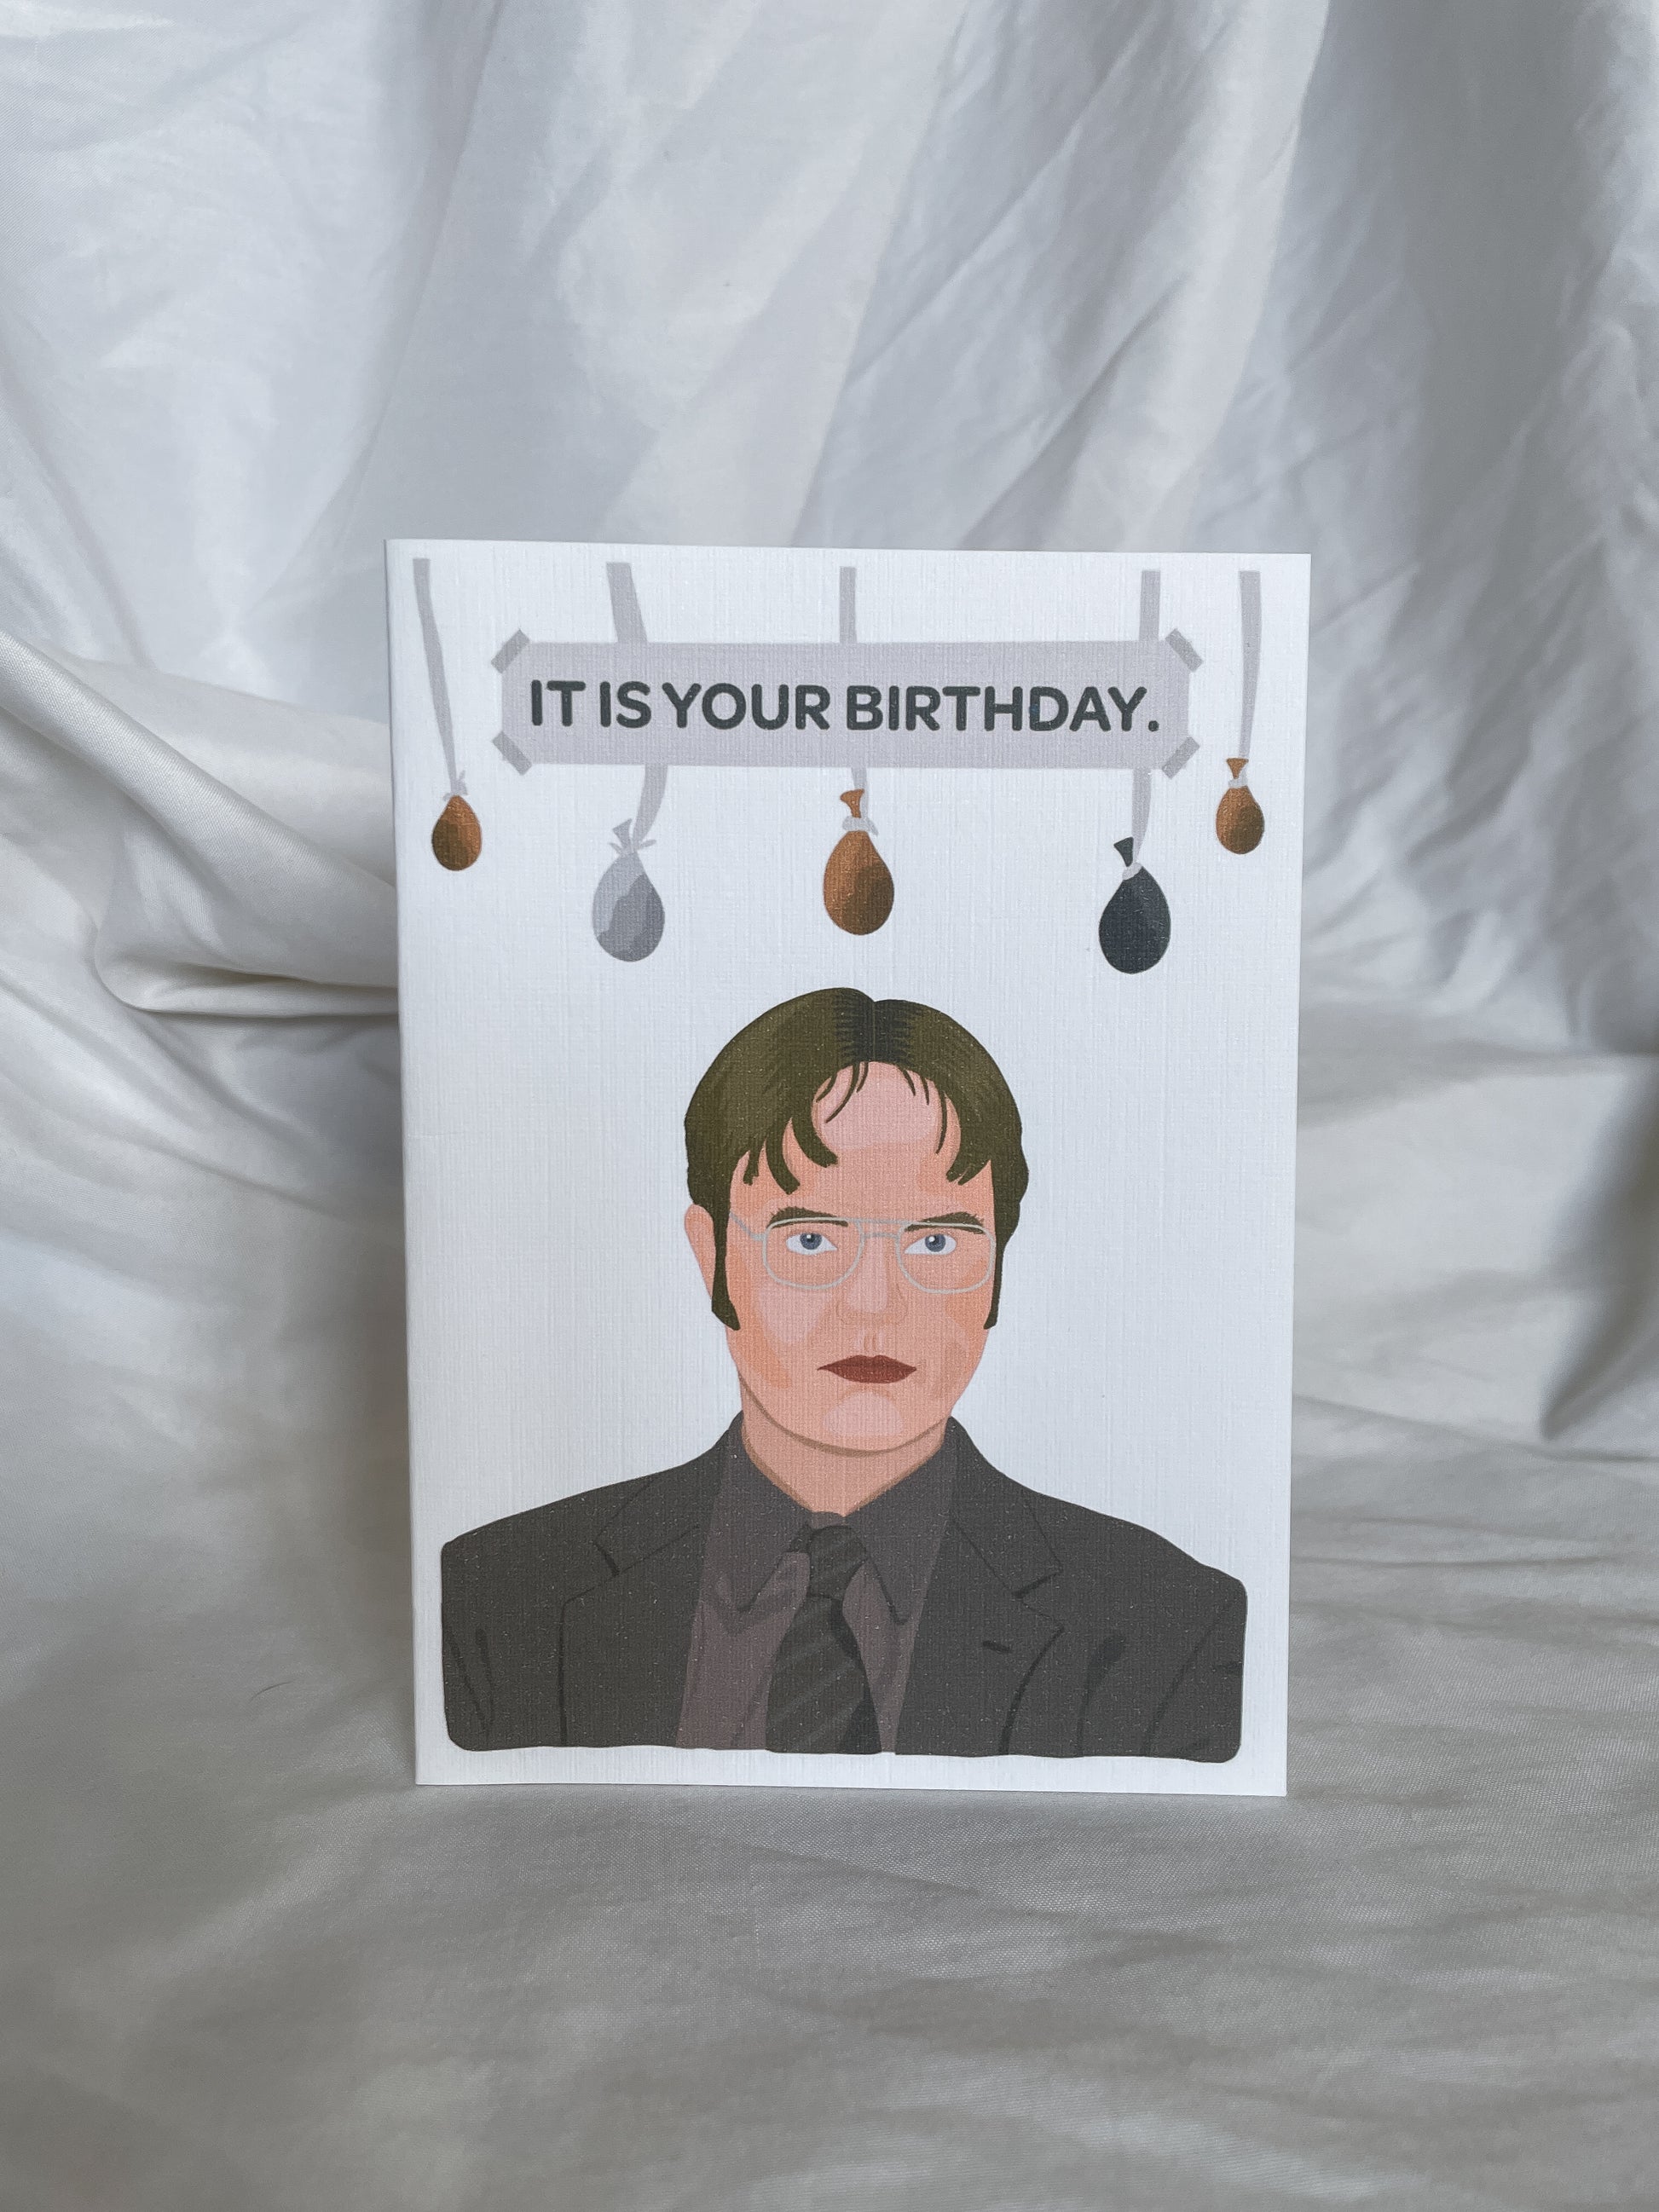 Give the gift of laughter with our Dwight Schrute birthday card, inspired by the iconic character from The Office! Featuring a hilarious illustration of Dwight in all his beet-farming, assistant regional manager glory